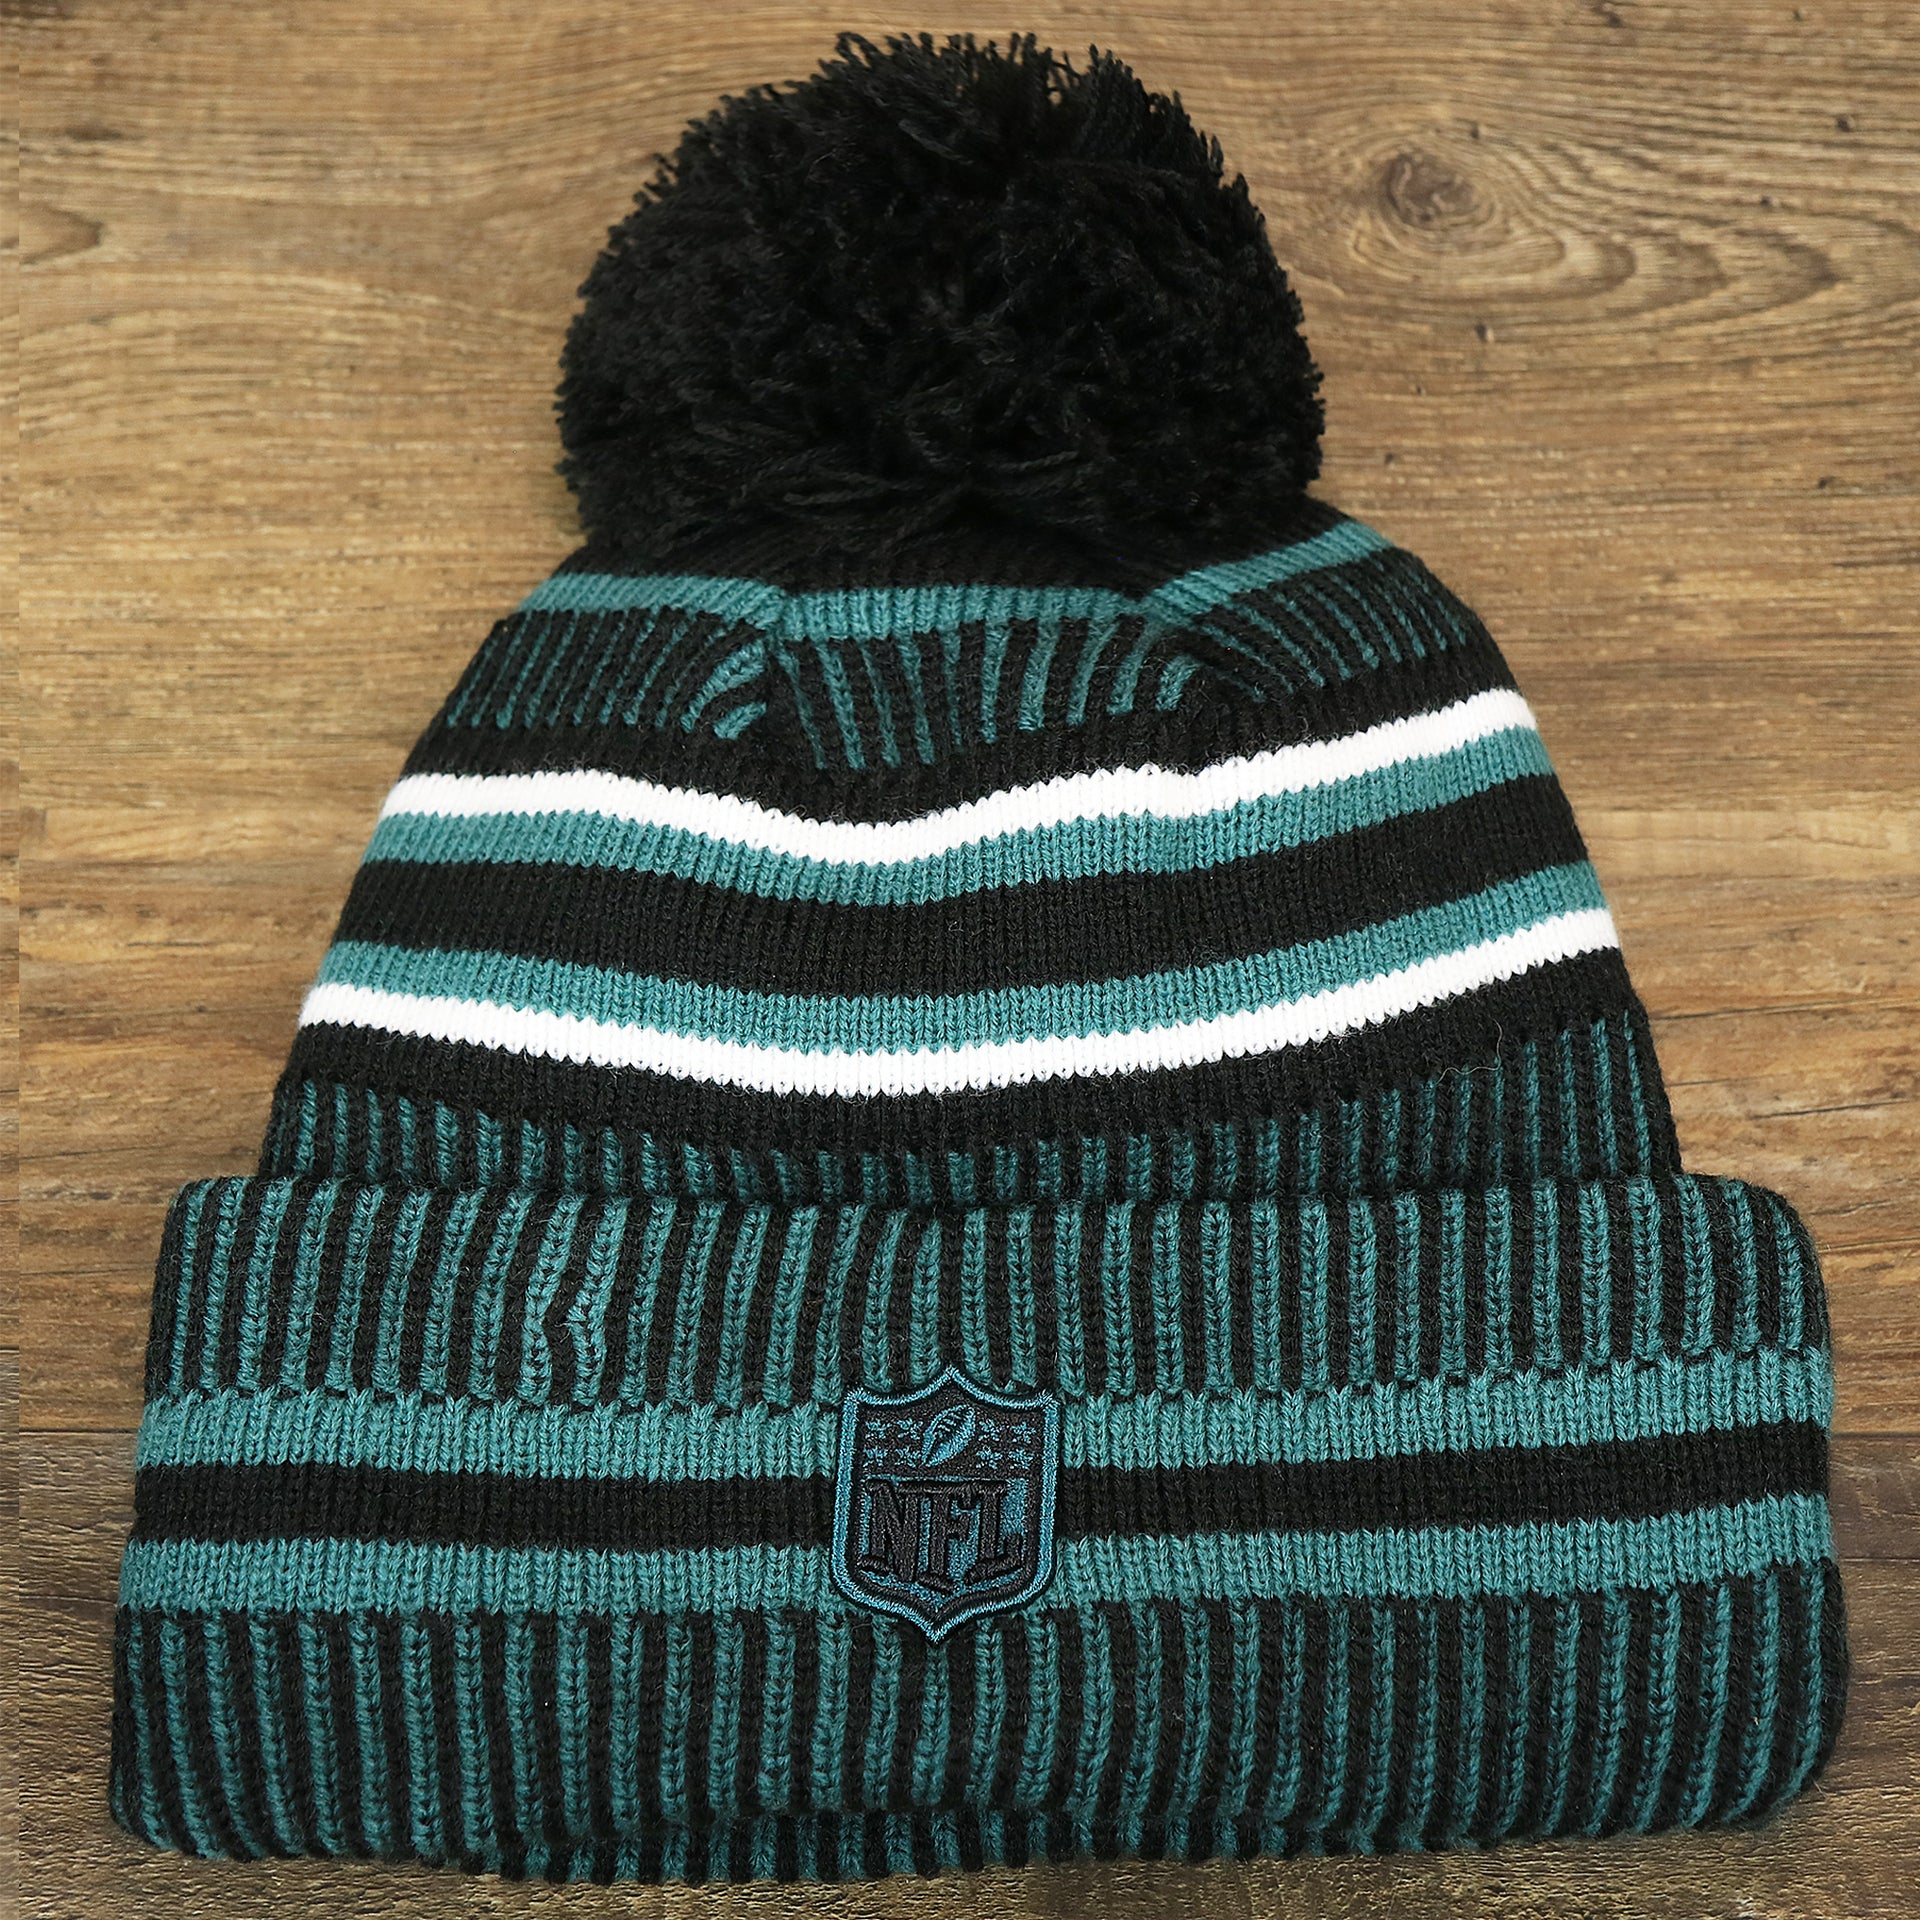 The backside of the Philadelphia Eagles Patch 1933 On Field Striped Eagles Colorway Pom Pom Winter Beanie | Black and Midnight Green Winter Beanie